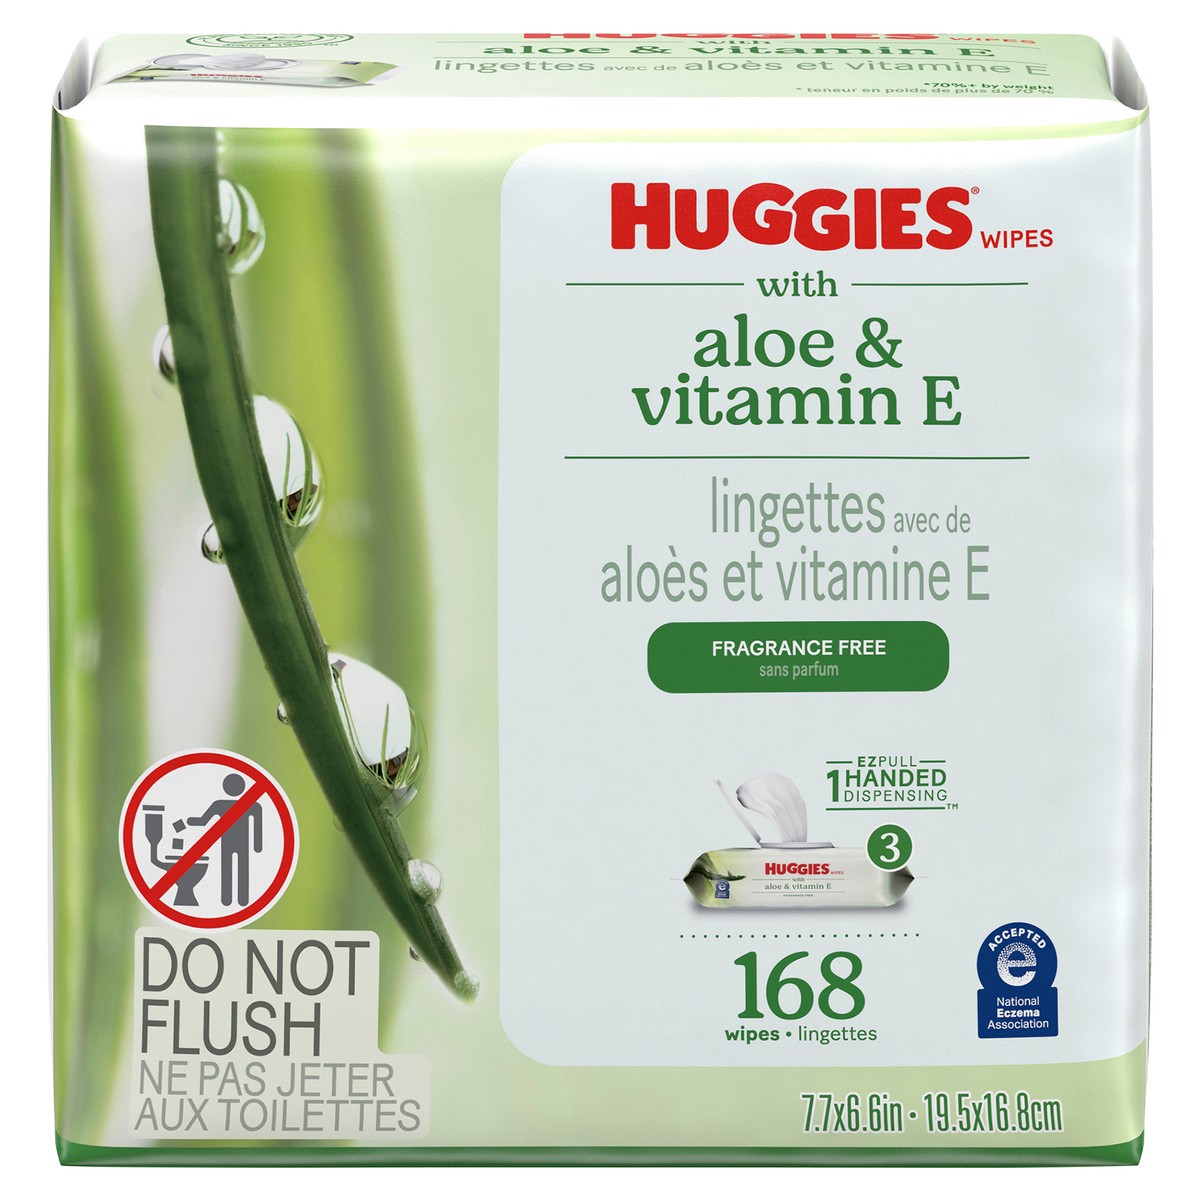 slide 8 of 13, Huggies Wipes with Aloe & Vitamin E, Unscented, 3 Flip-Top Packs (168 Wipes Total), 3 ct